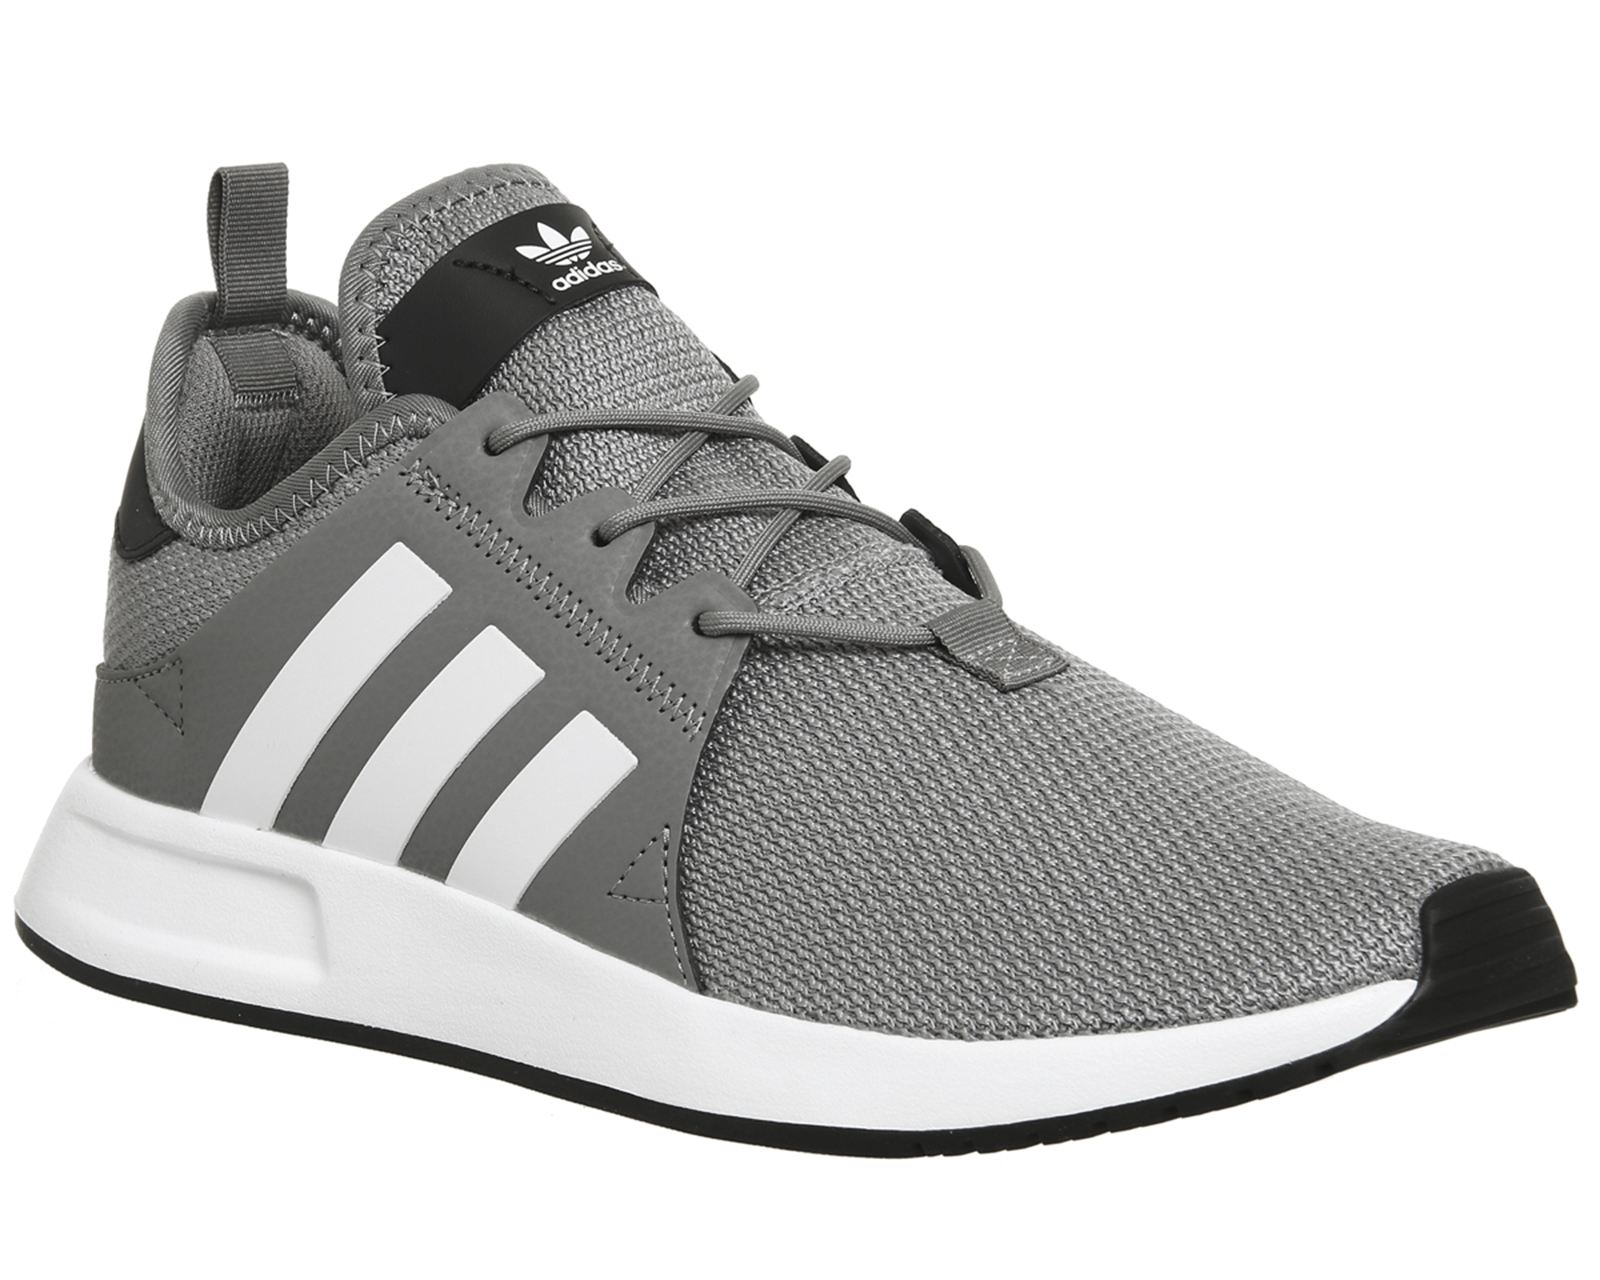 adidas X_PLR Trainers Grey White Carbon - His trainers